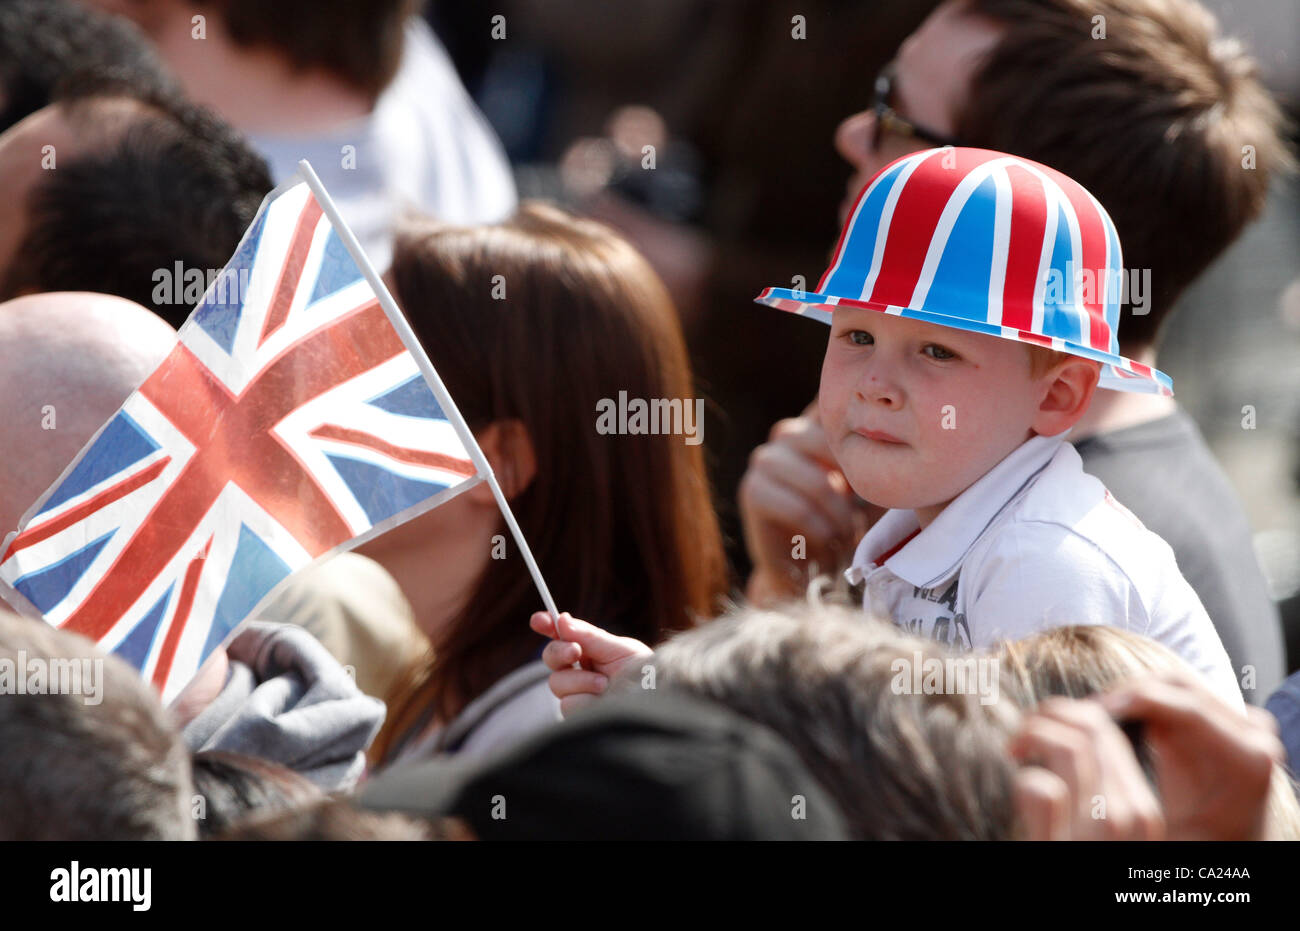 3 YEAR OLD ROYAL SUPPORTER IN THE CROWD WAITS TO SEE THE QUEEN MANCHESTER TOWN HALL ARRIVAL 23 March 2012 MANCHESTER EYE HOSPITA Stock Photo